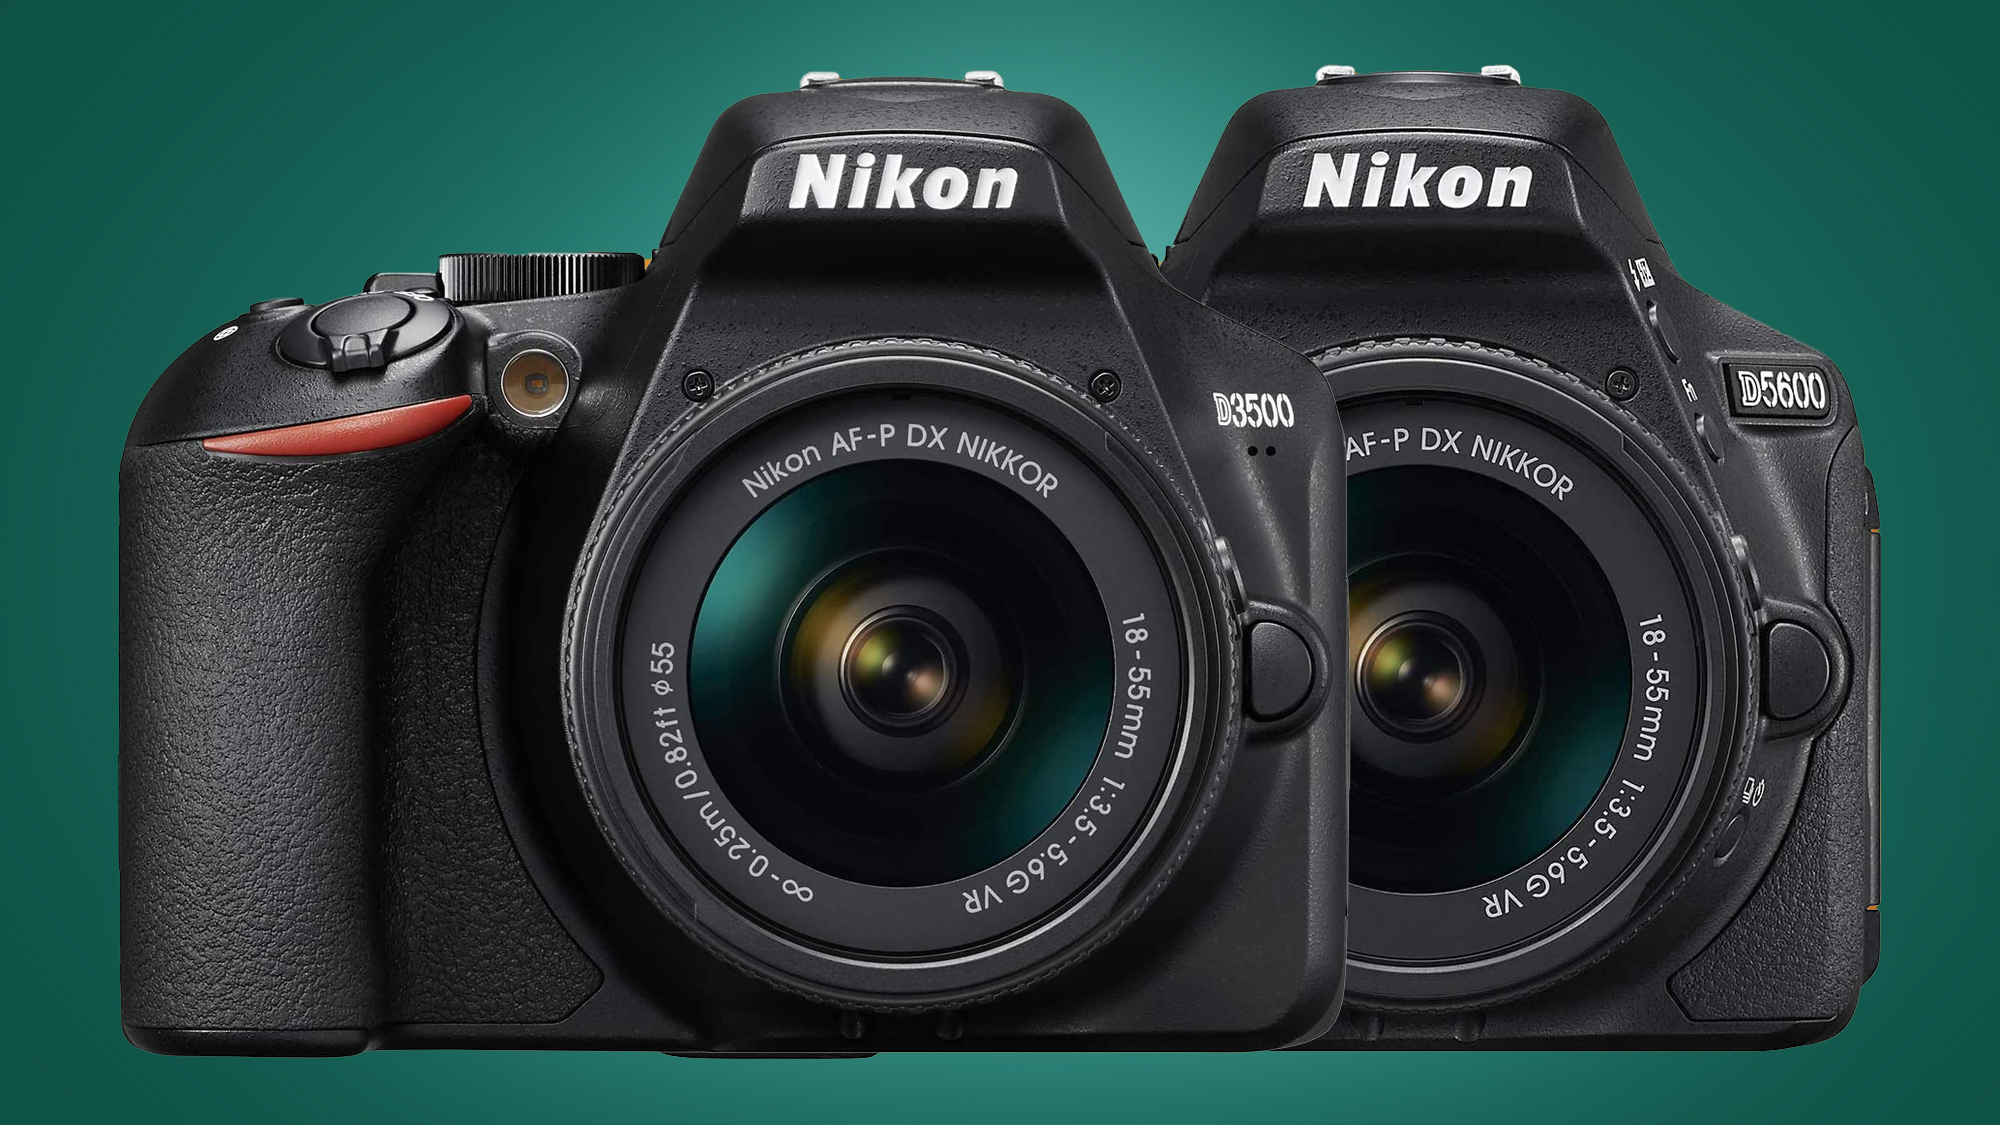 The beginner DSLR is dead: Nikon sunsets the D and D